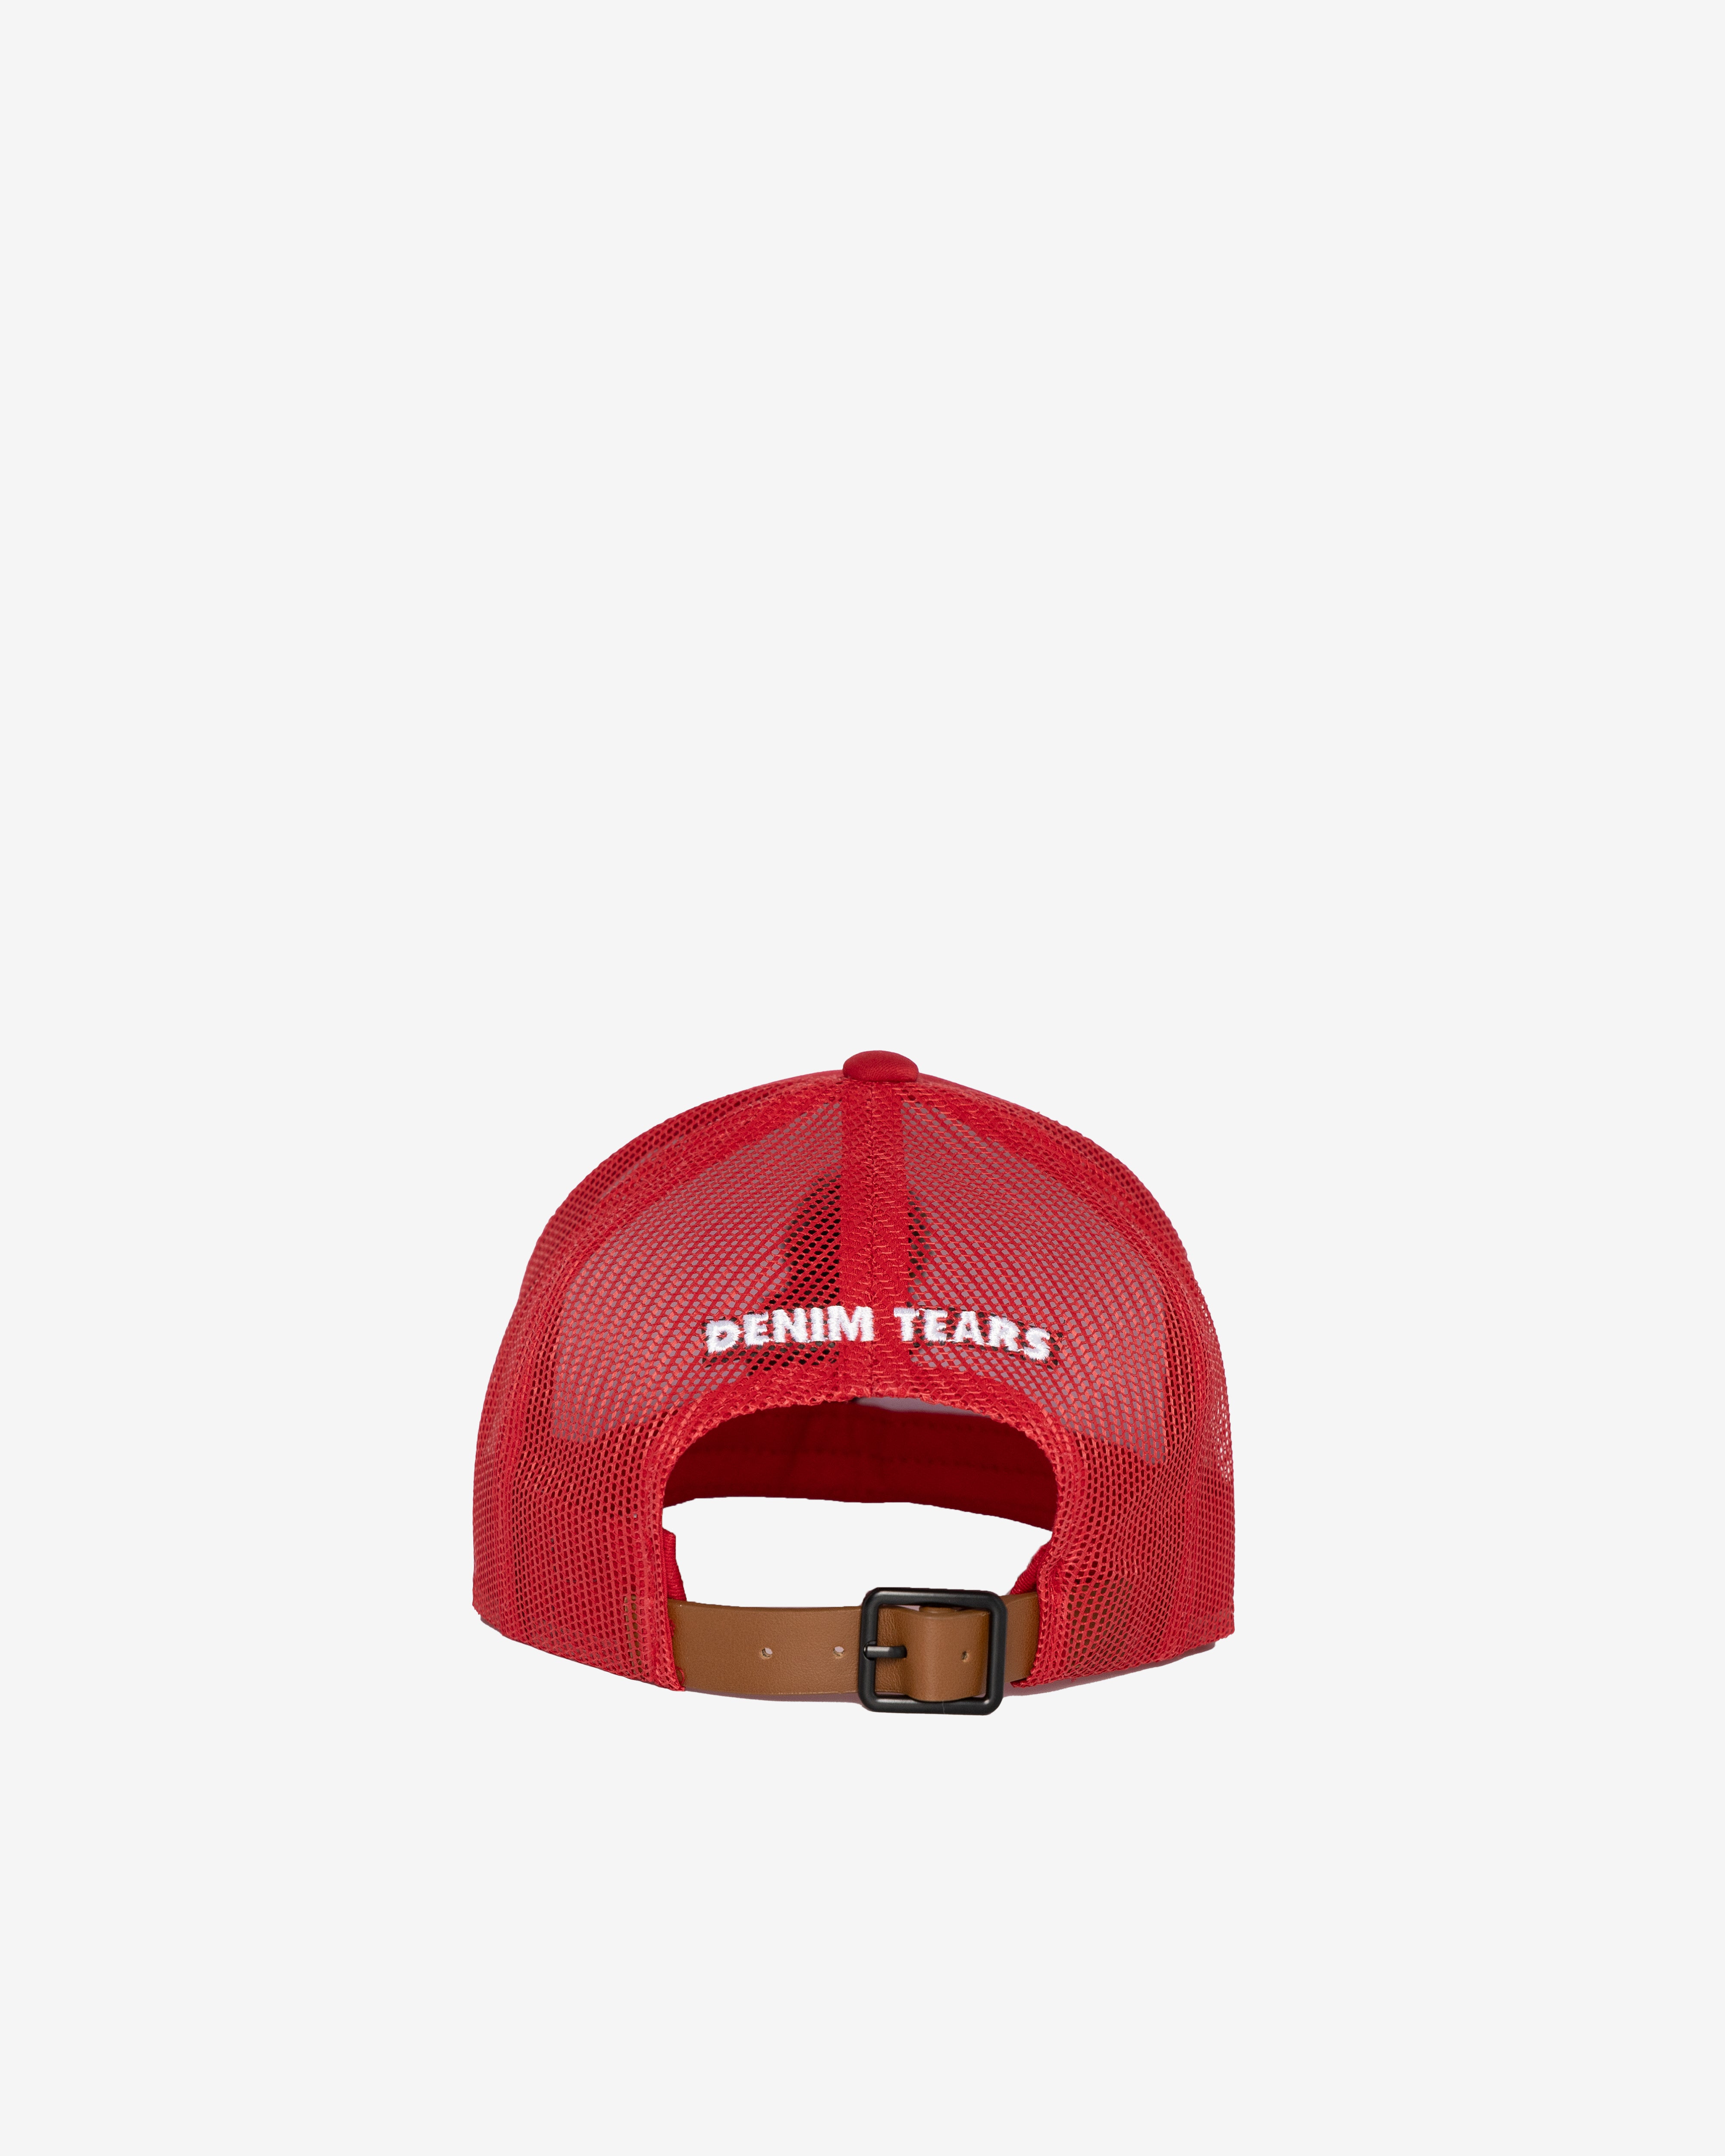 Denim Tears - Crown Made of Cotton Hat - (Red)